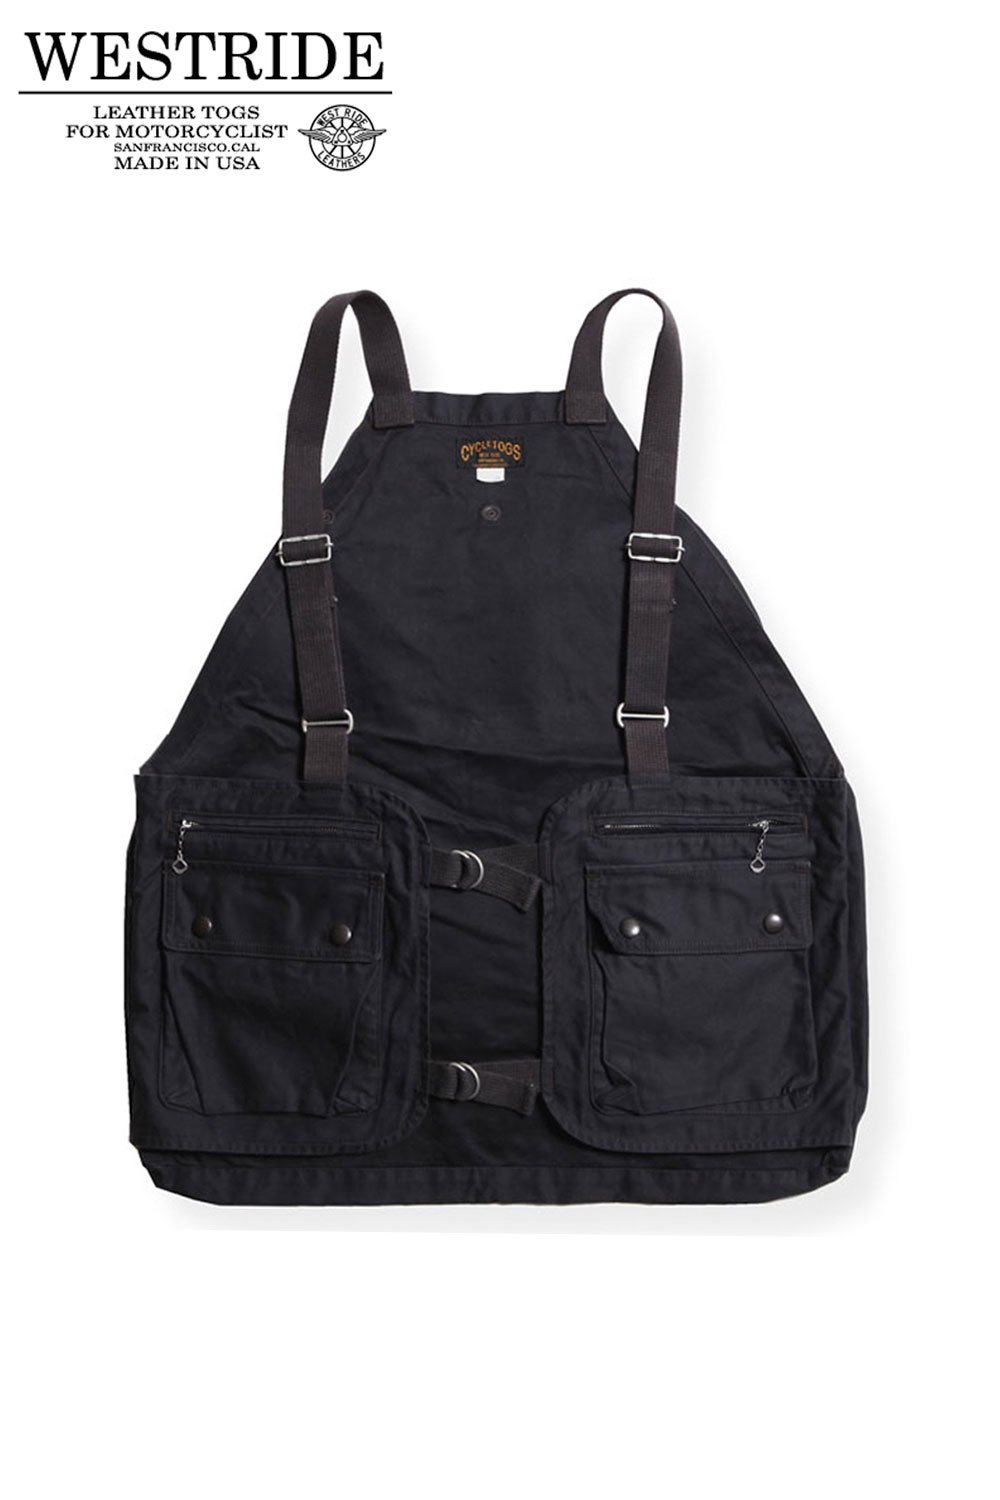 west ride cycle togs fort collins vest - tracemed.com.br